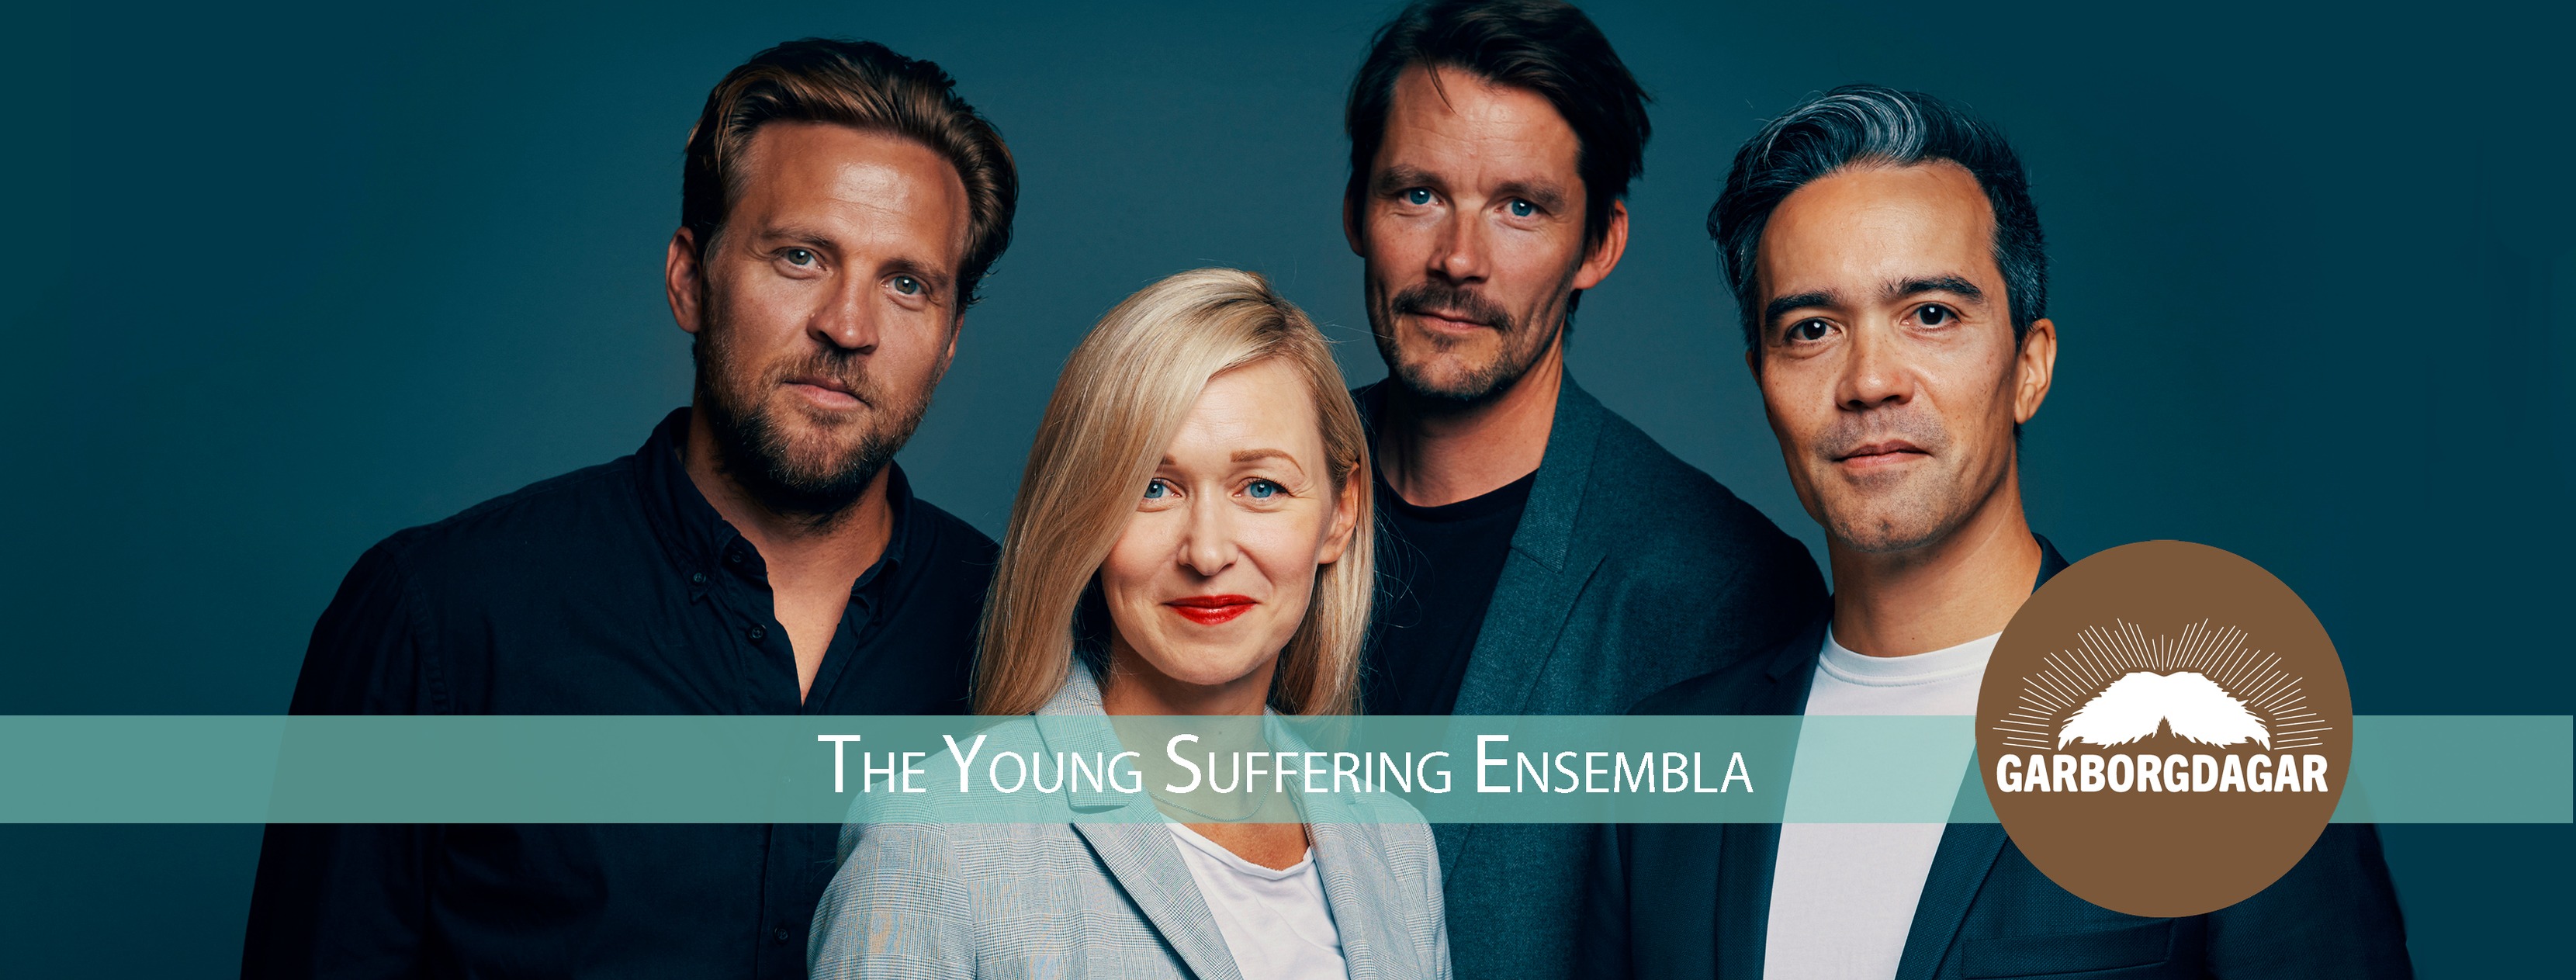 The Young Suffering Ensembla